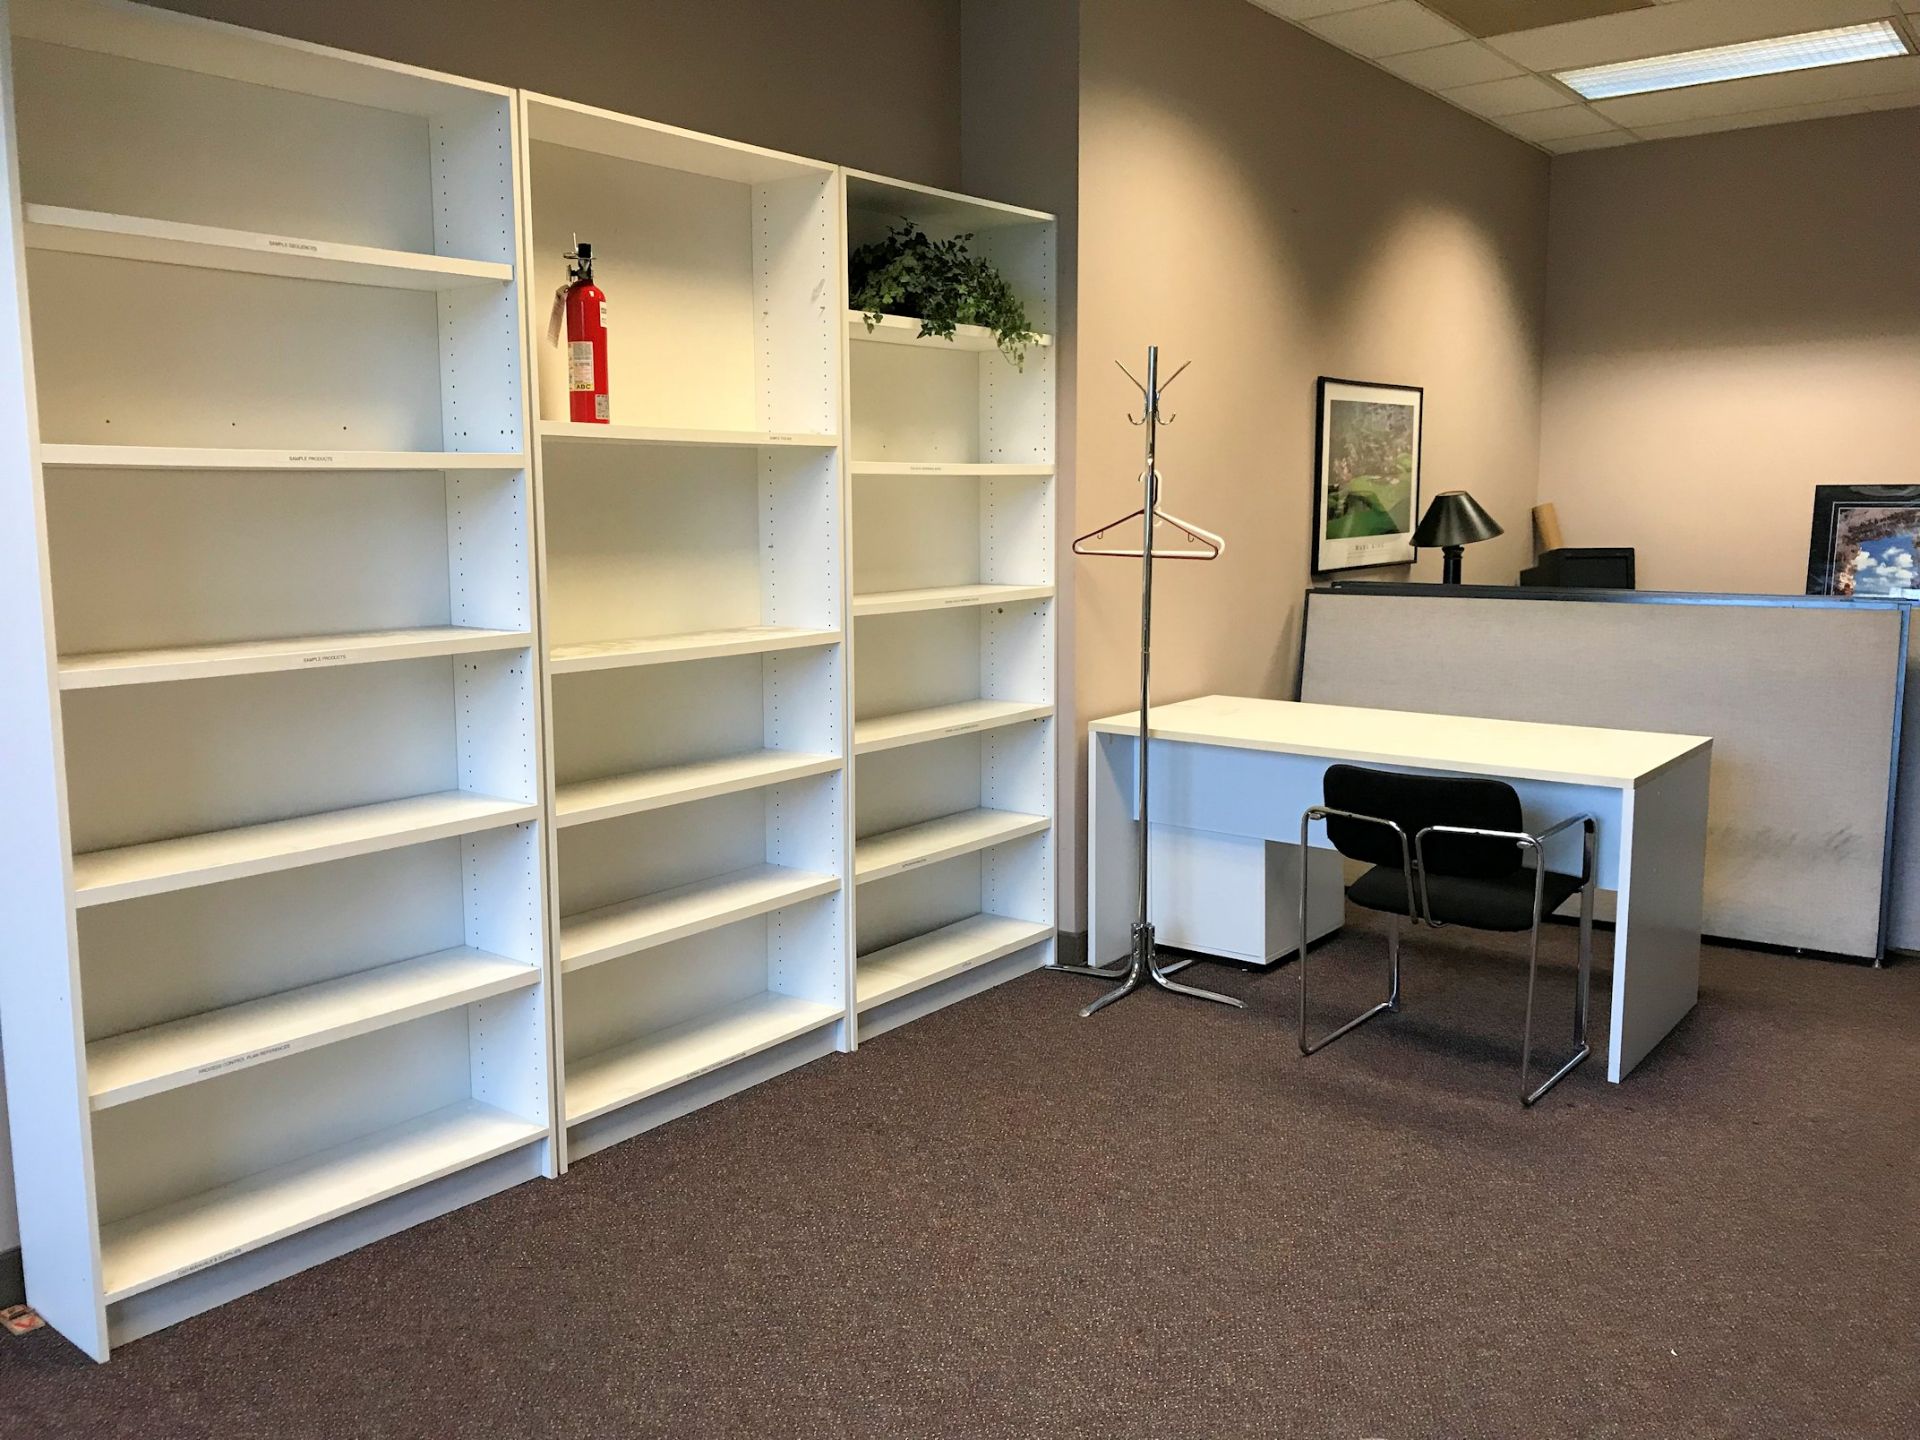 Lot-Furniture, Bookcases and File Cabinets in (1) Office, (No Server or Plotter) - Image 3 of 4